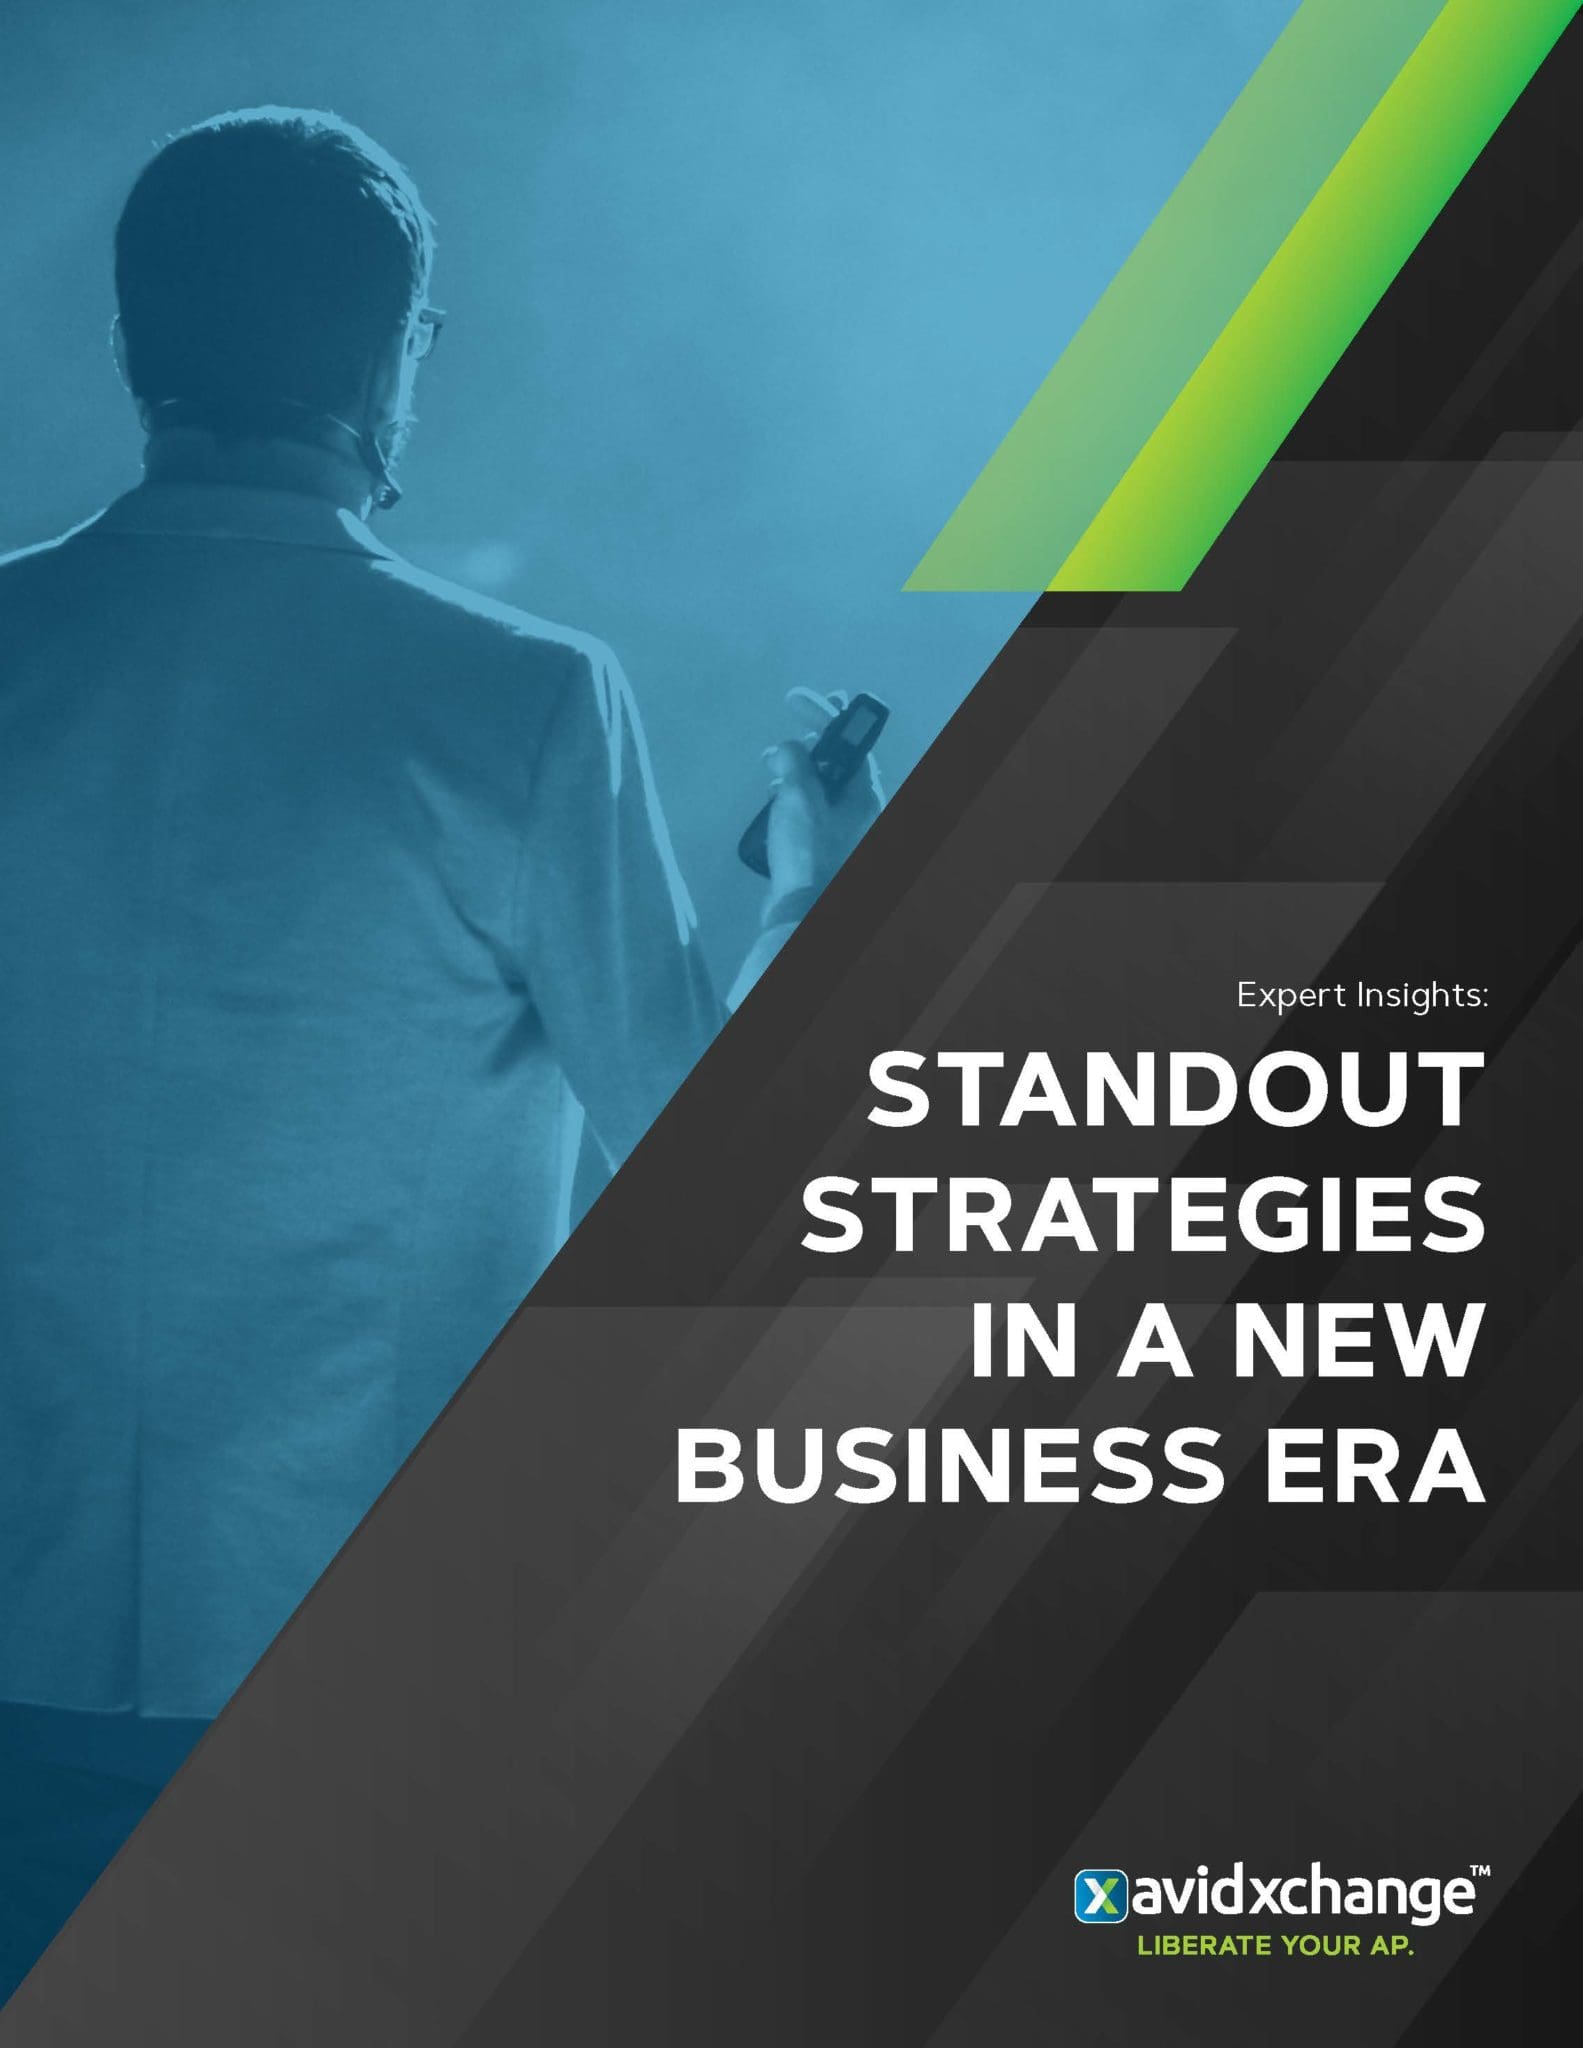 Standout Strategies in a New Business Era